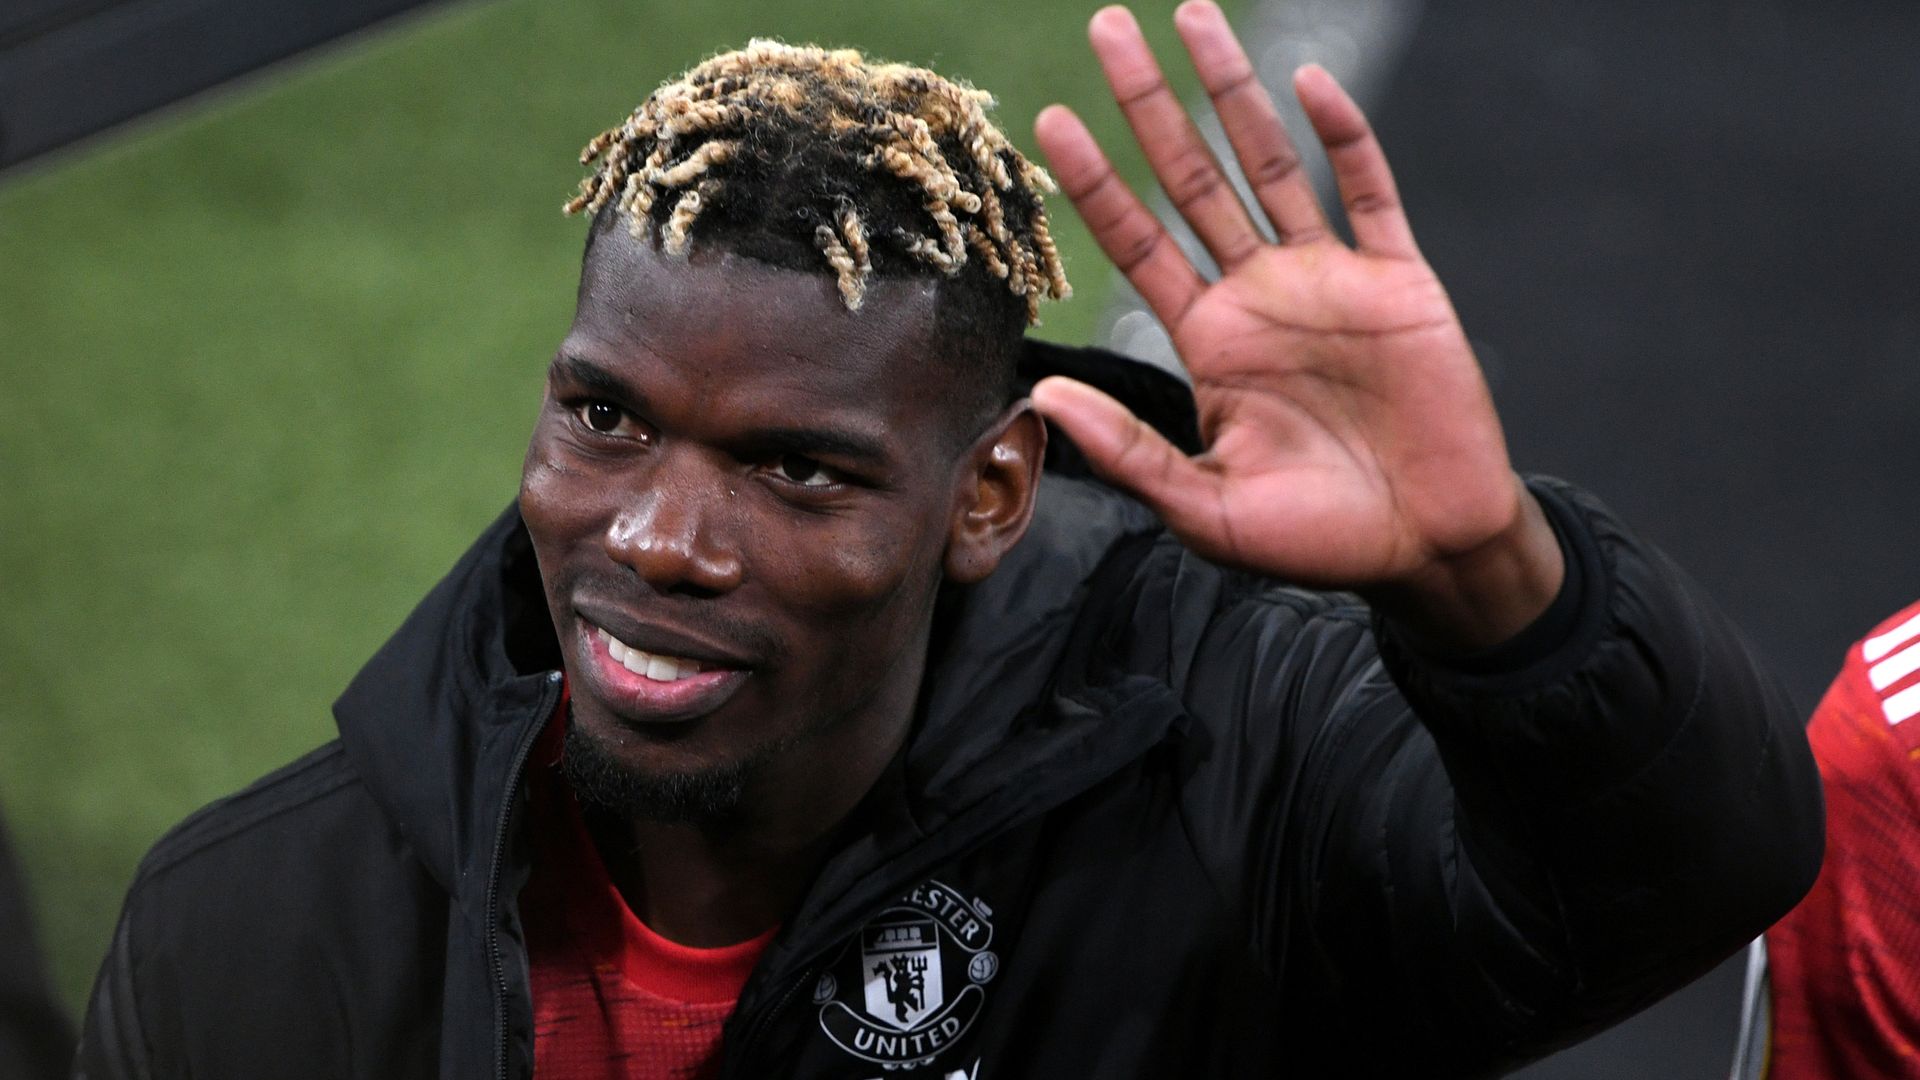 PSG offer for Pogba unlikely this summer